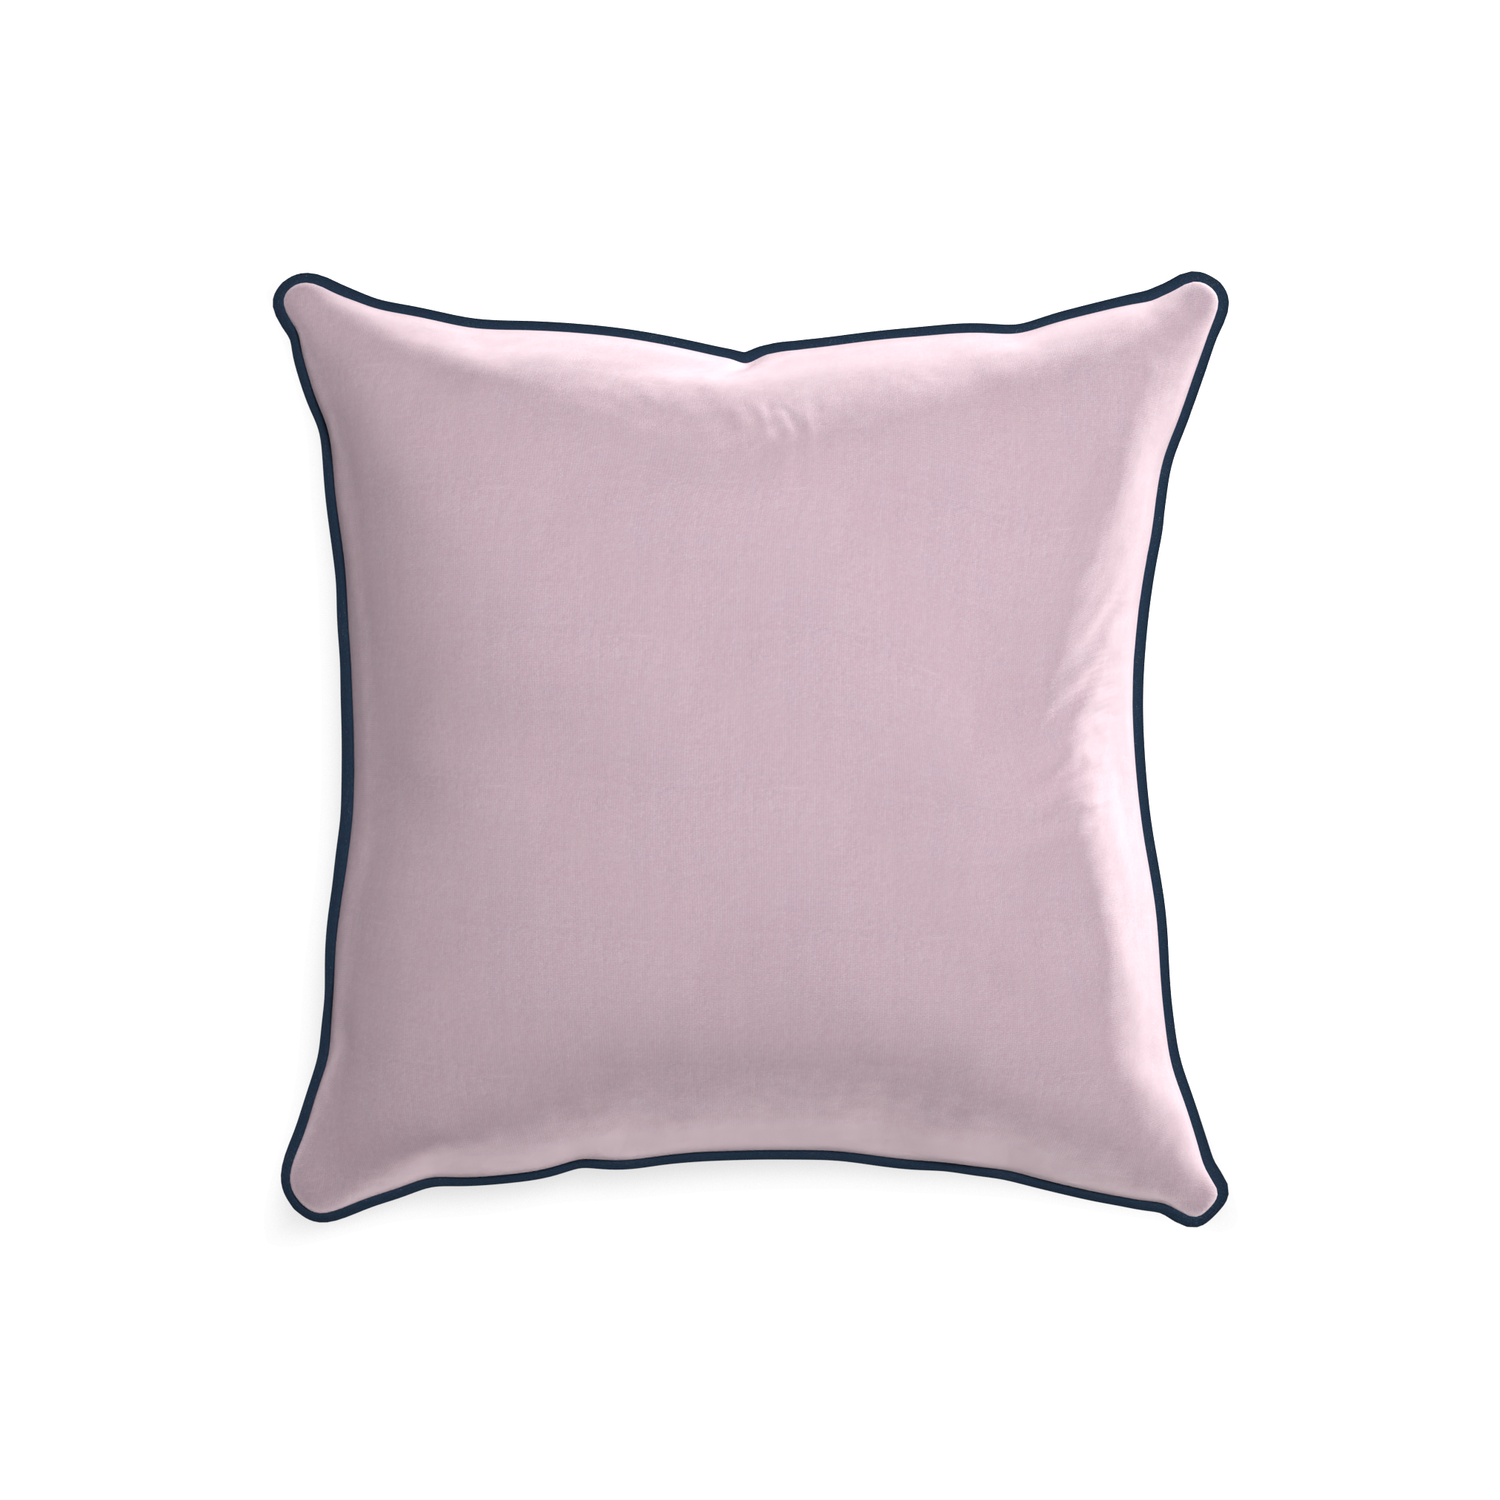 20-square lilac velvet custom lilacpillow with c piping on white background